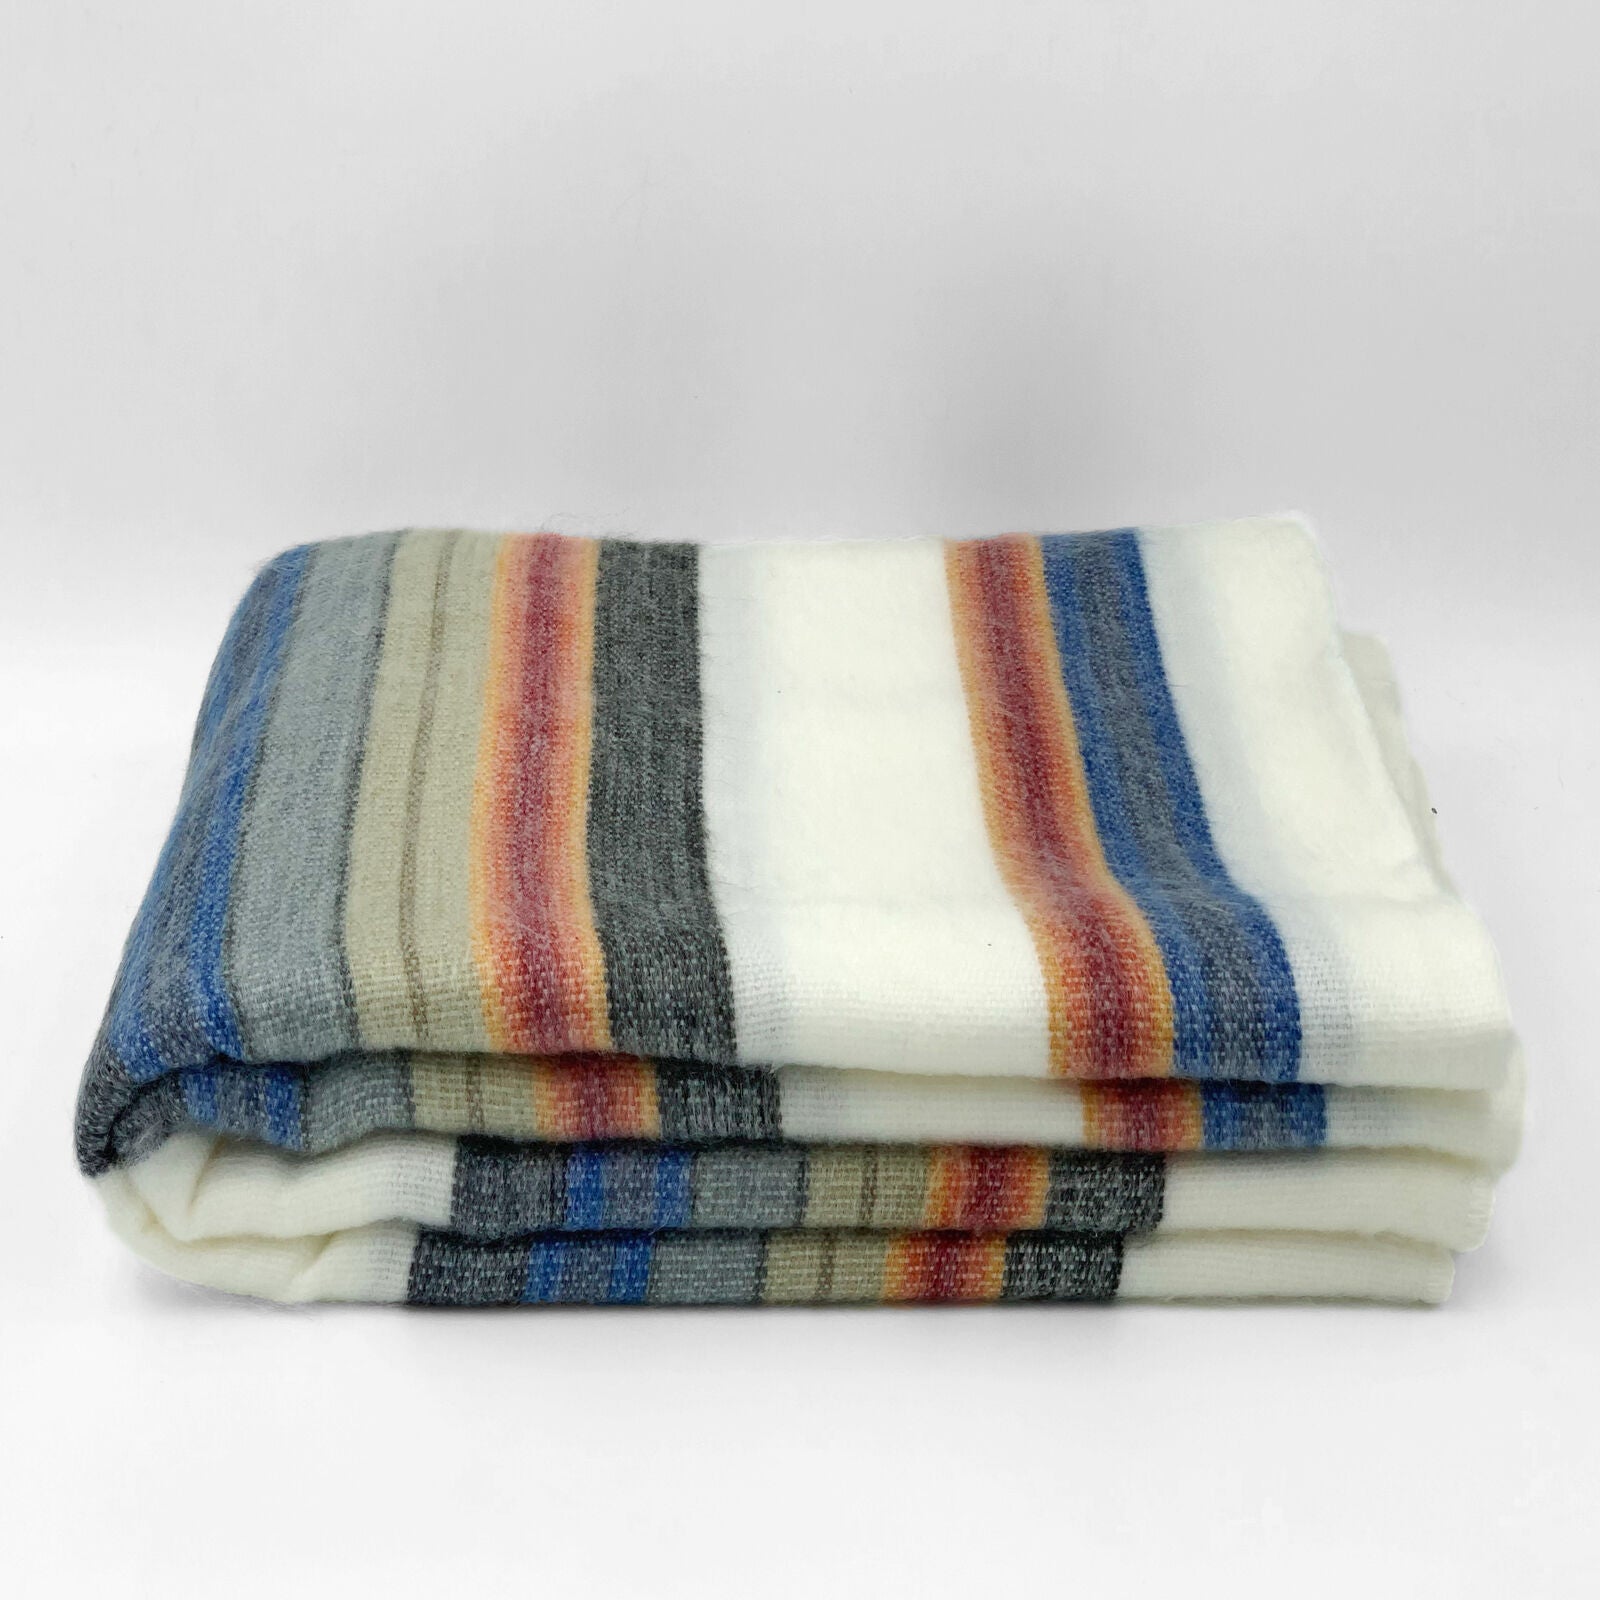 Siguitag - Baby Alpaca Wool Throw Blanket / Sofa Cover - Queen 90" x 65" - multi colored thin stripes pattern